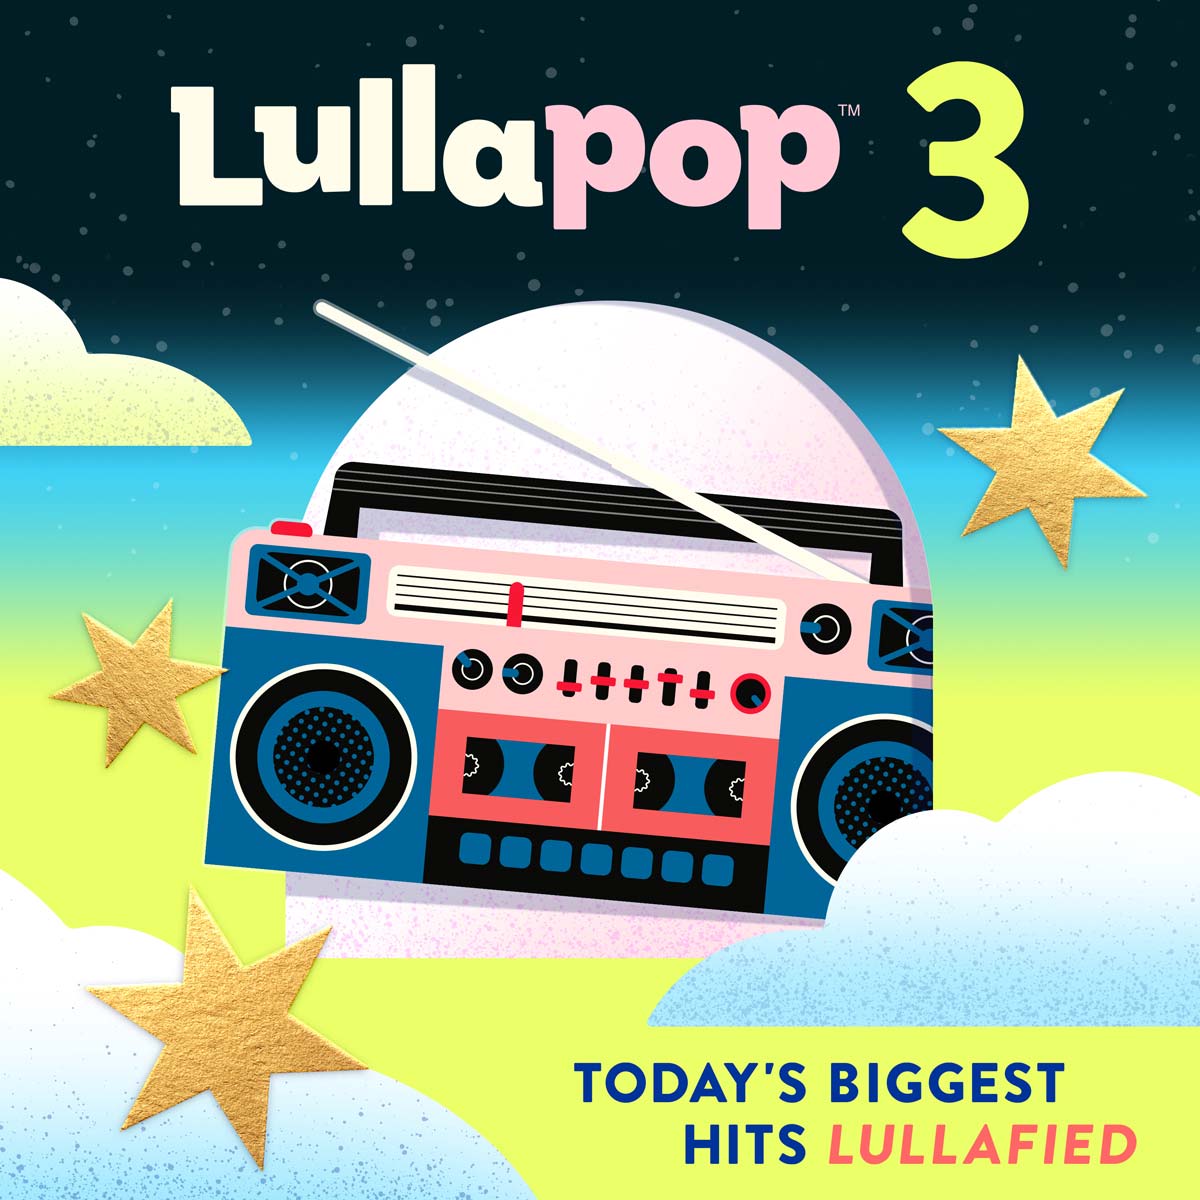 Featured image for “Lullapop 3”